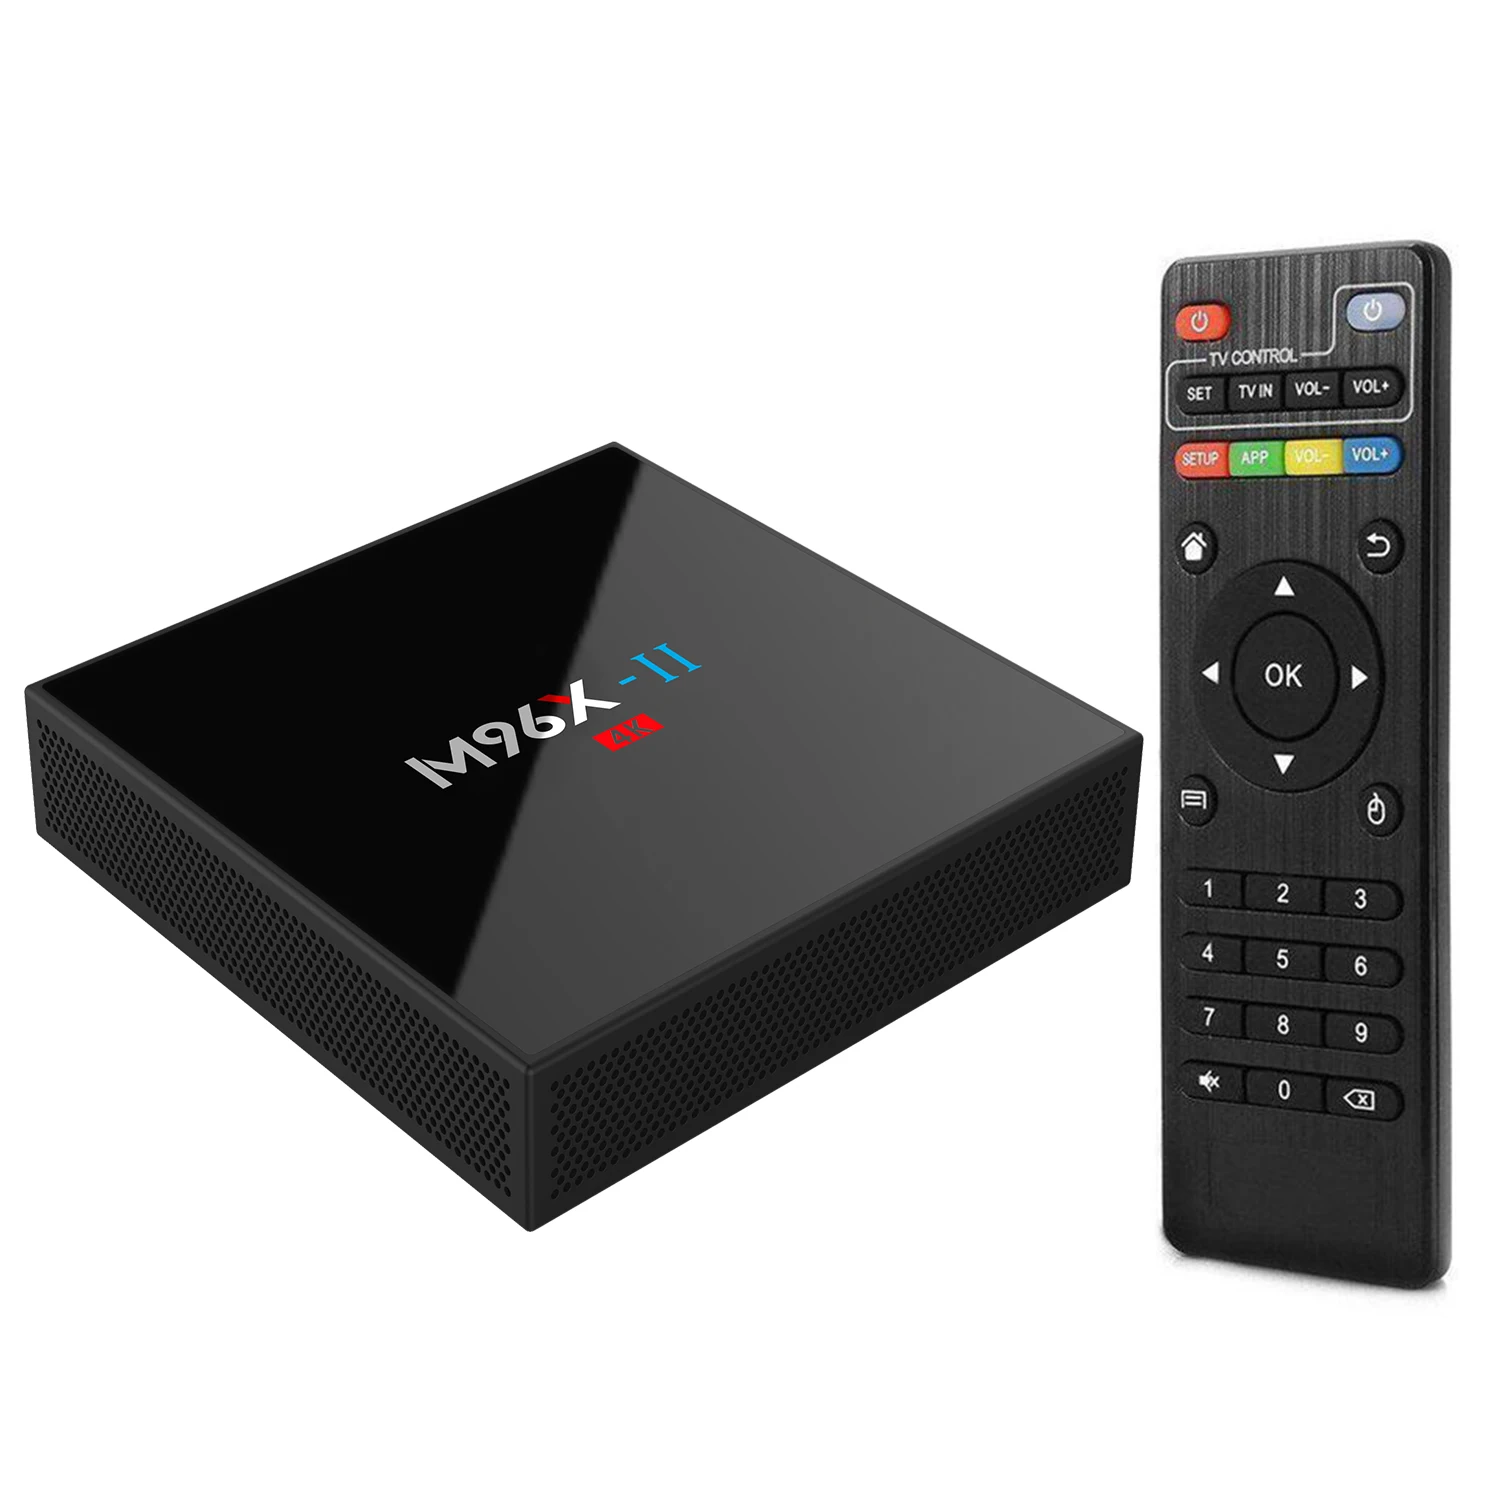 Relatively Retouch Passed 2022 Best Selling Mexico Android Tv Box With Amlogic S905x Chipset - Buy  Best Android Tv Box,Android 9.0 Wifi Tv Smart Box,Tv Box Product on  Alibaba.com